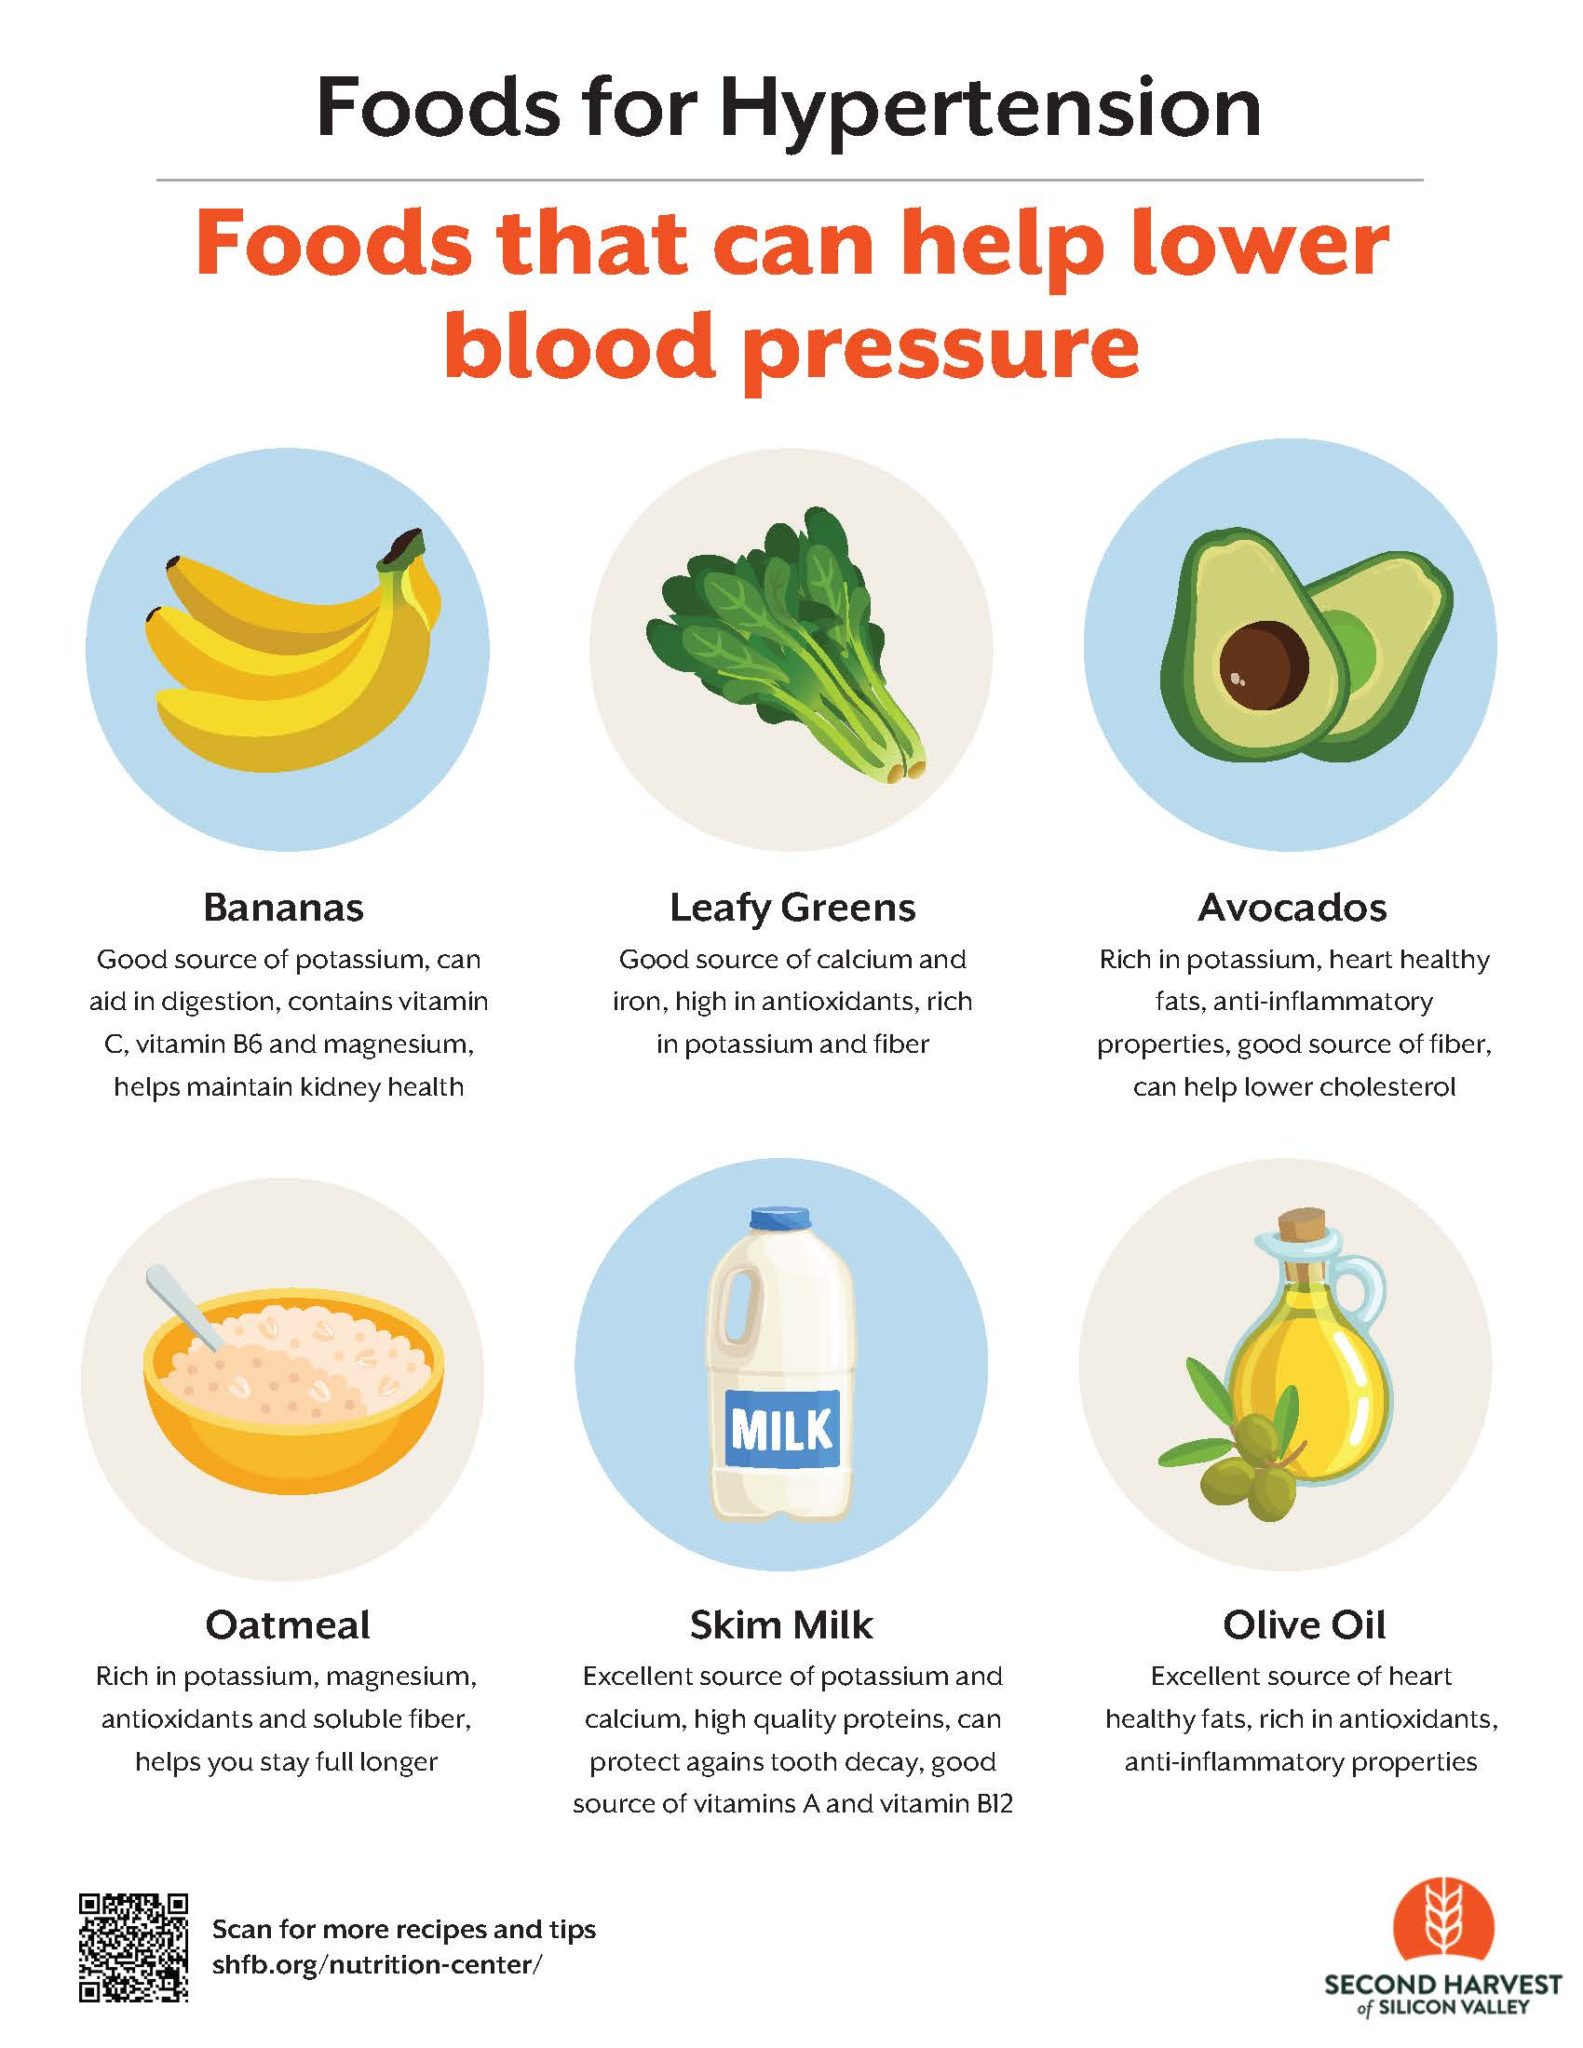 Foods That Can Help Lower Blood Pressure | Second Harvest of Silicon Valley